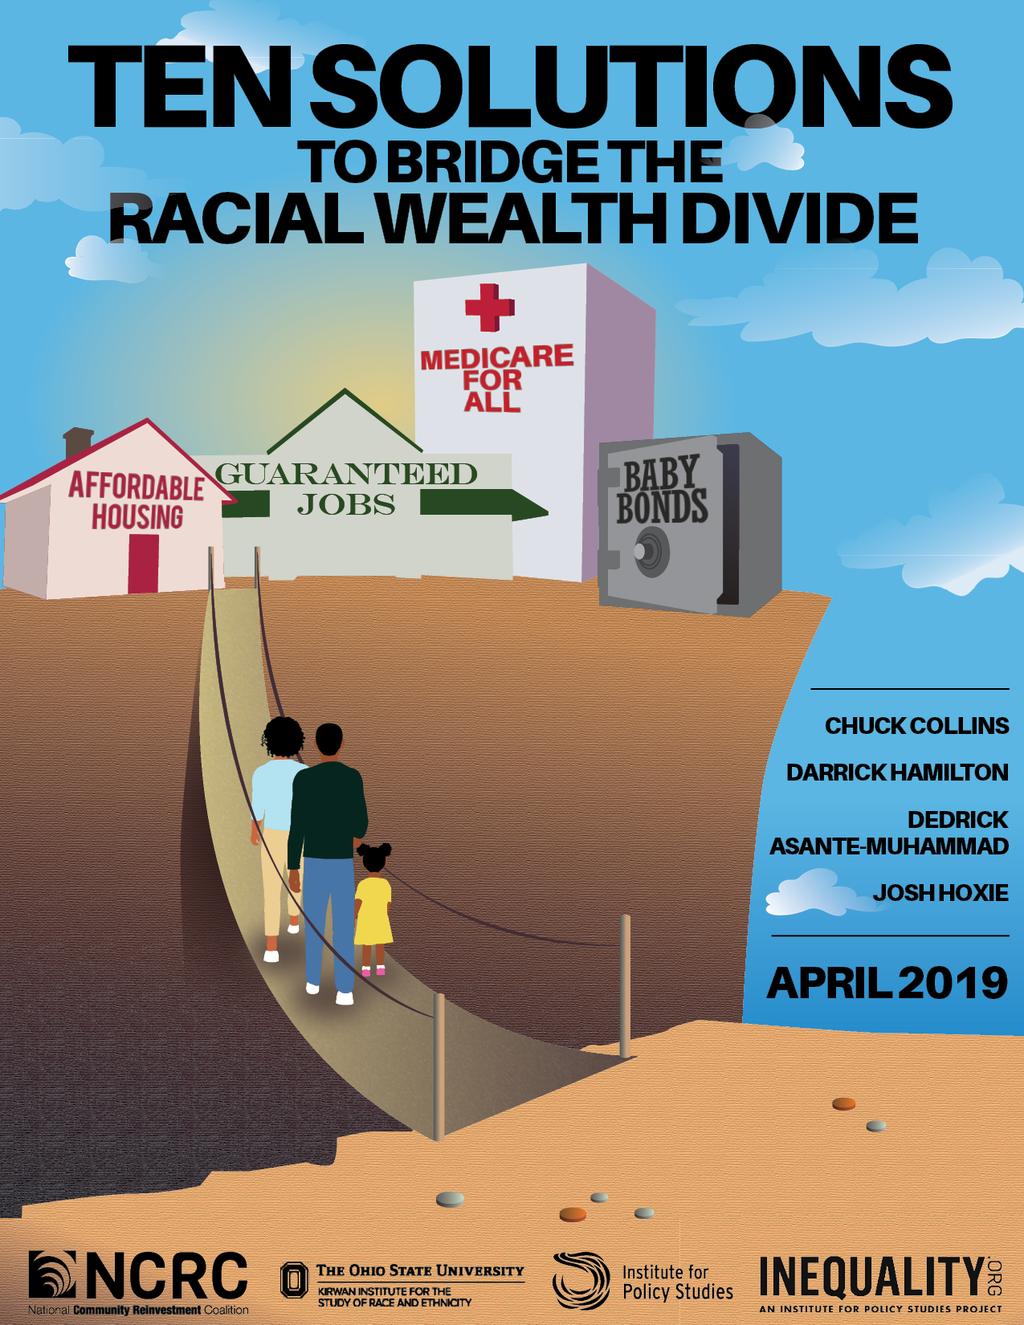 Ten Solutions to Close the Racial Wealth Divide Executive Summary By: Dedrick Asante-Muhammad, Chuck Collins, Darrick Hamilton, and Josh Hoxie April 16, 2019 Full report available at: https://ips-dc.